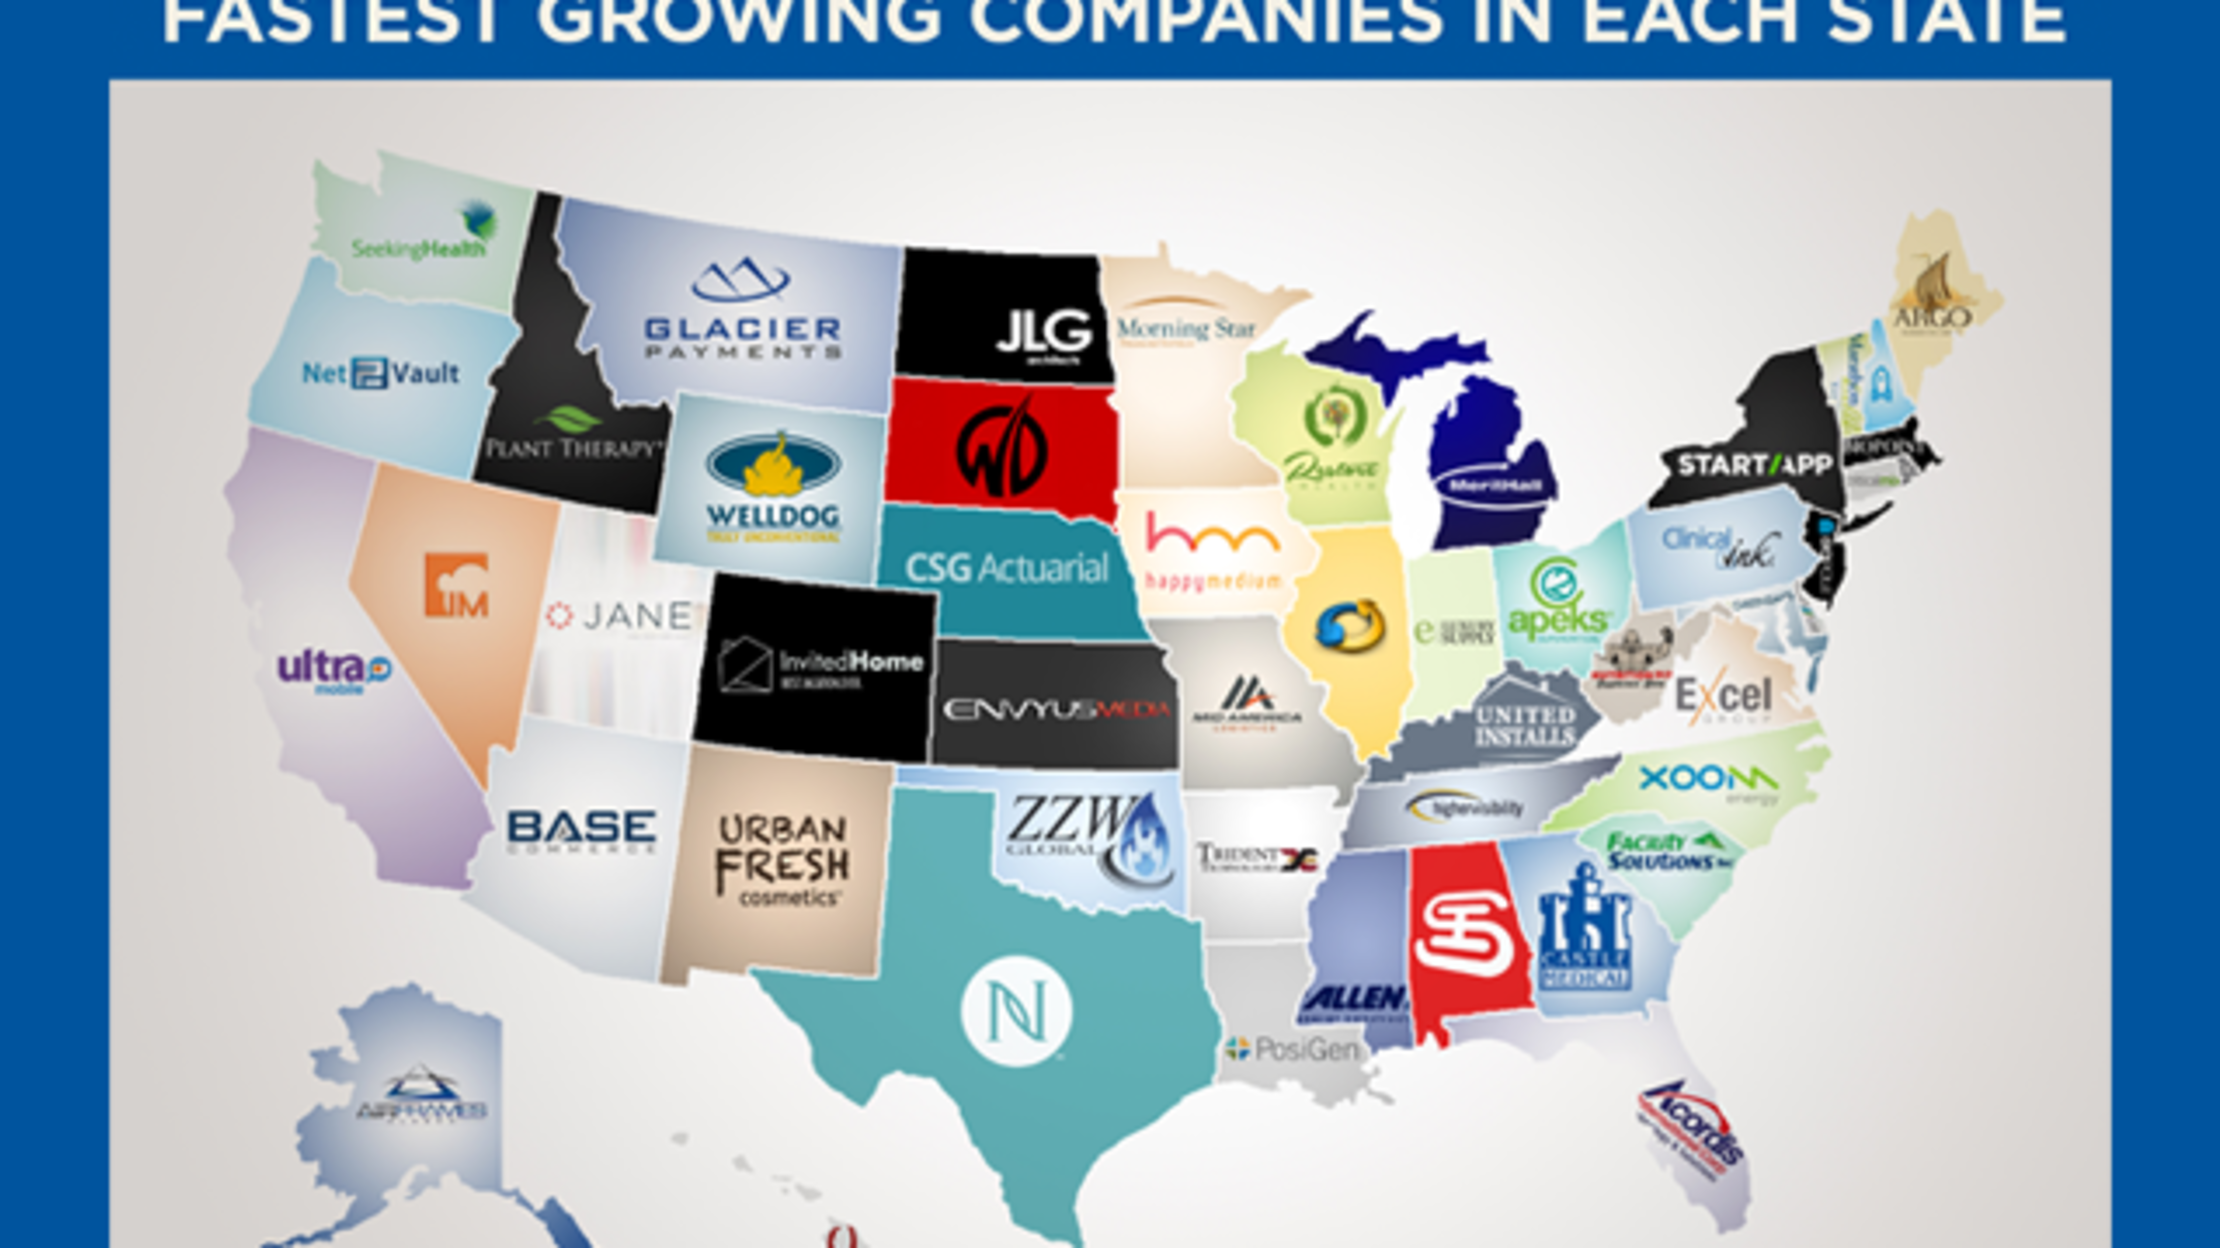 The FastestGrowing Company in Each State Mental Floss